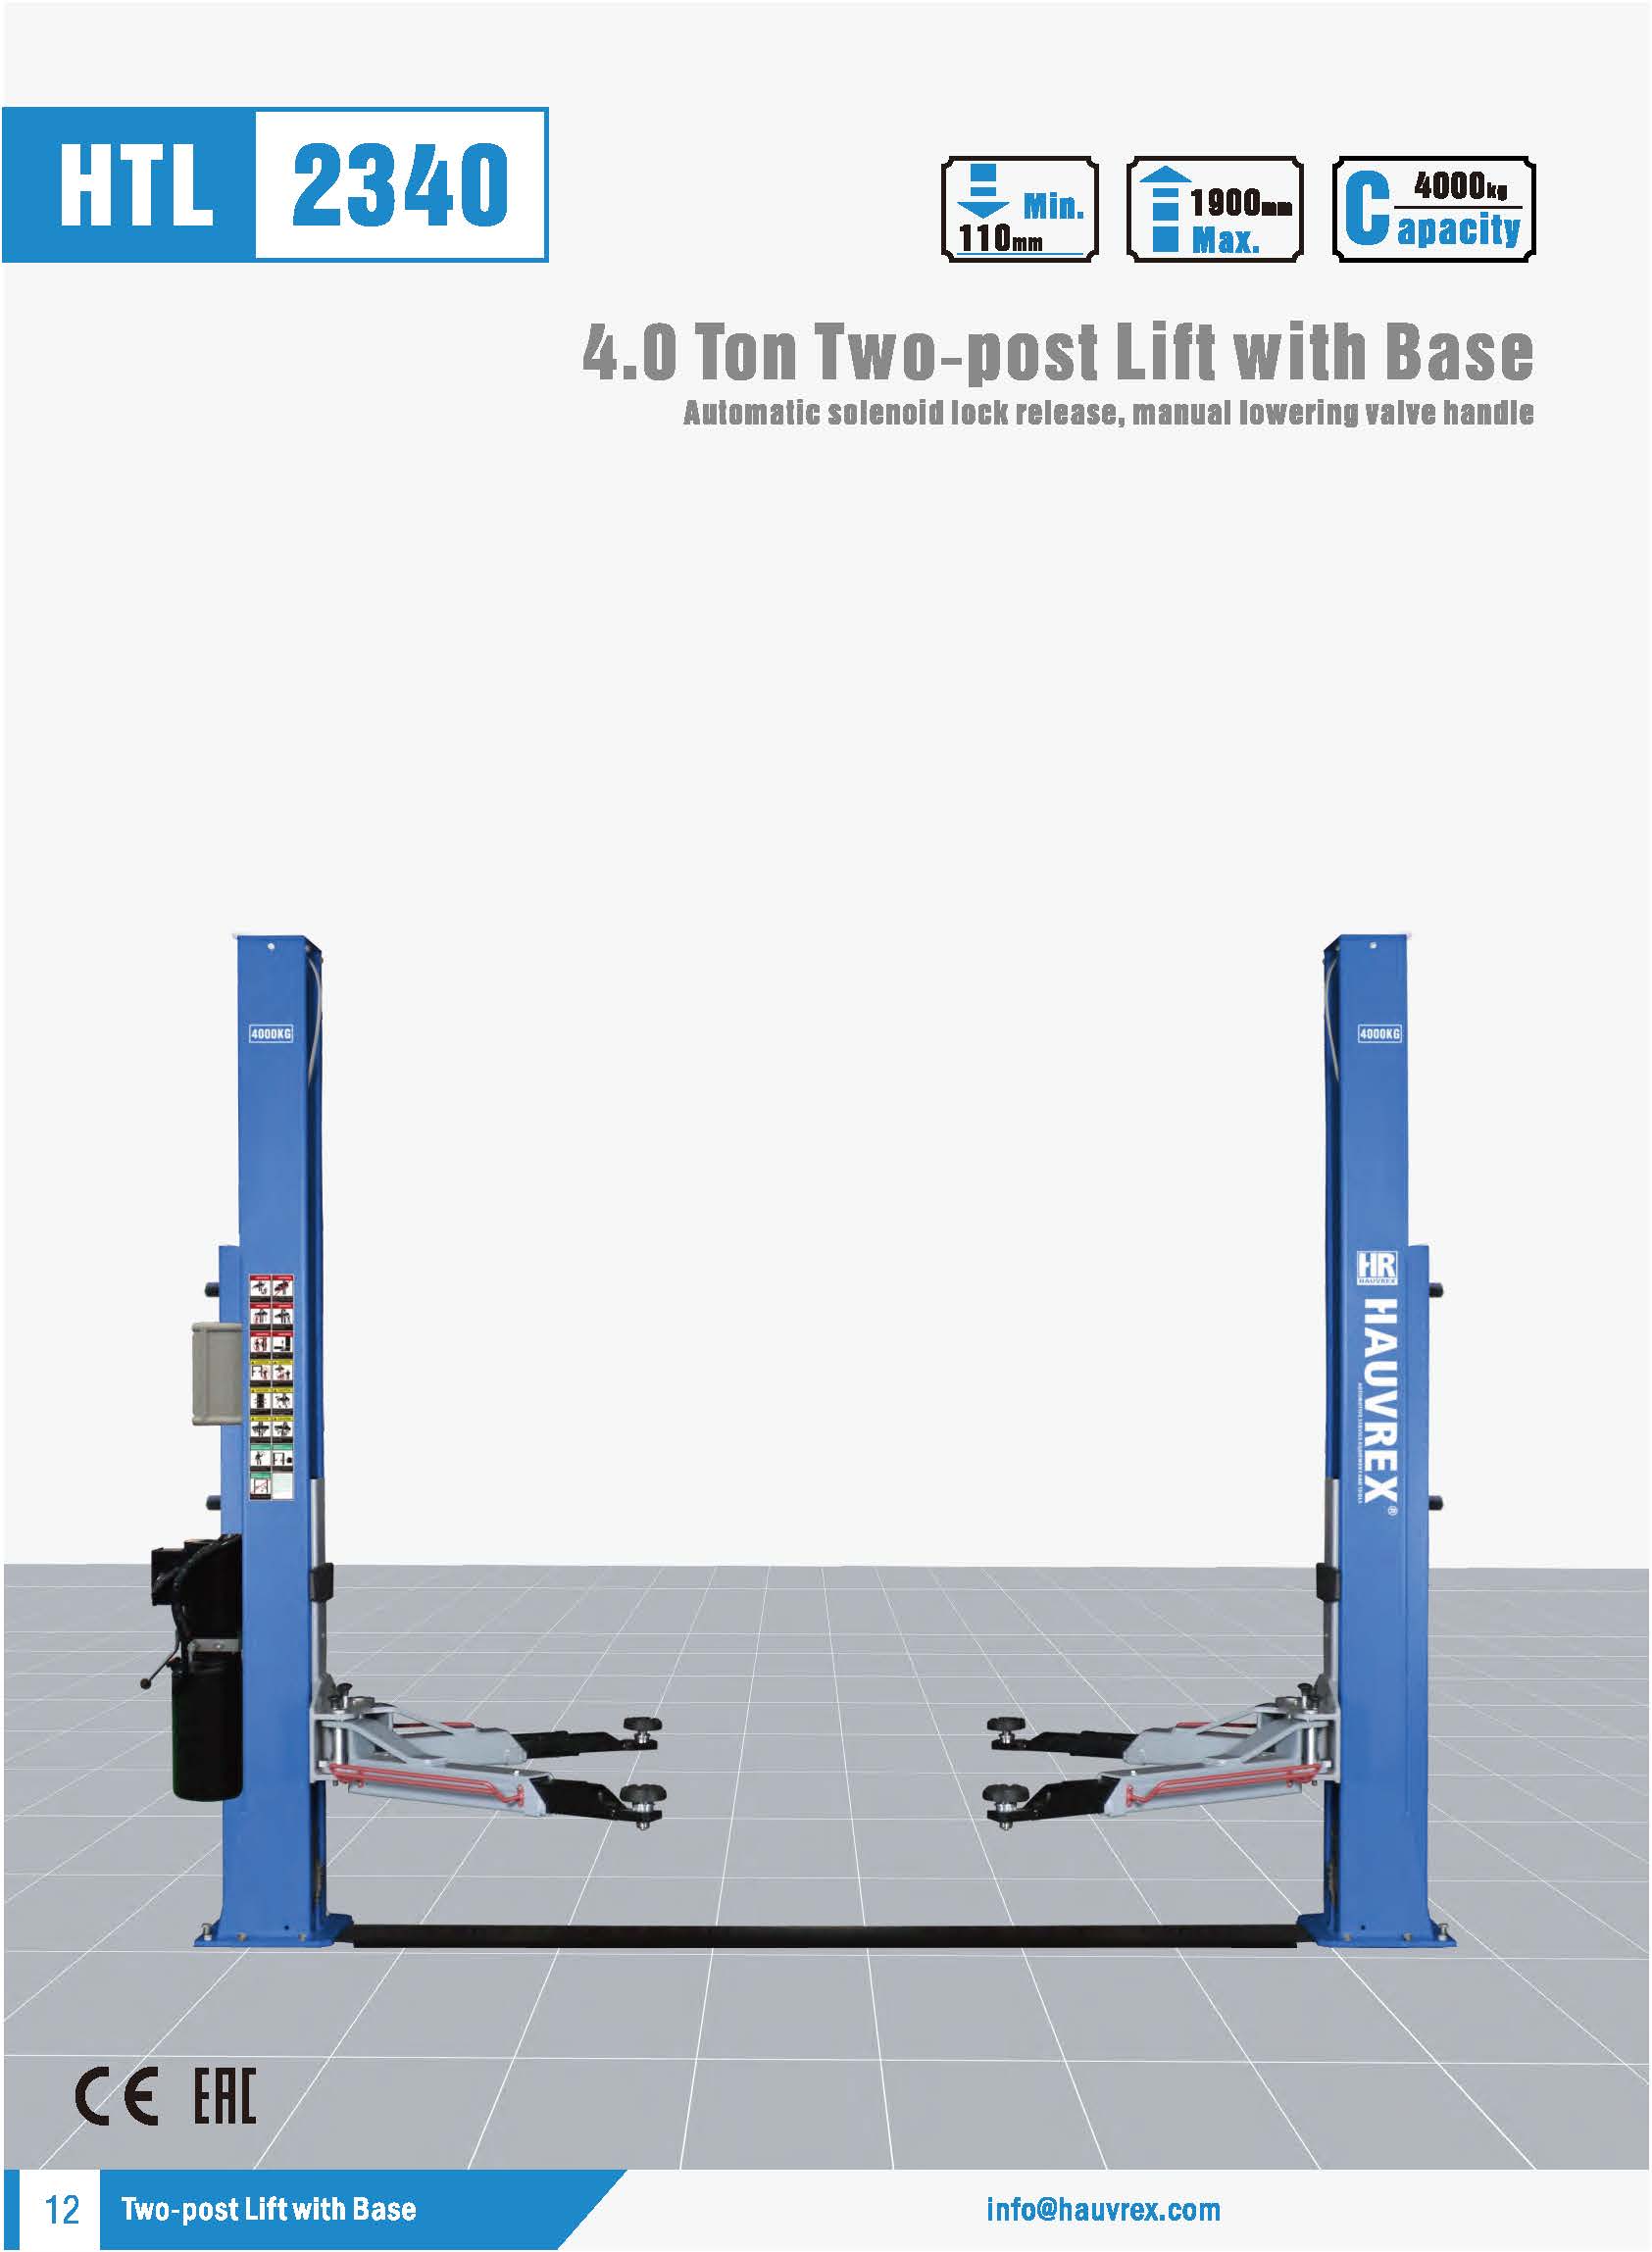 HTL2340 Two-post Lift